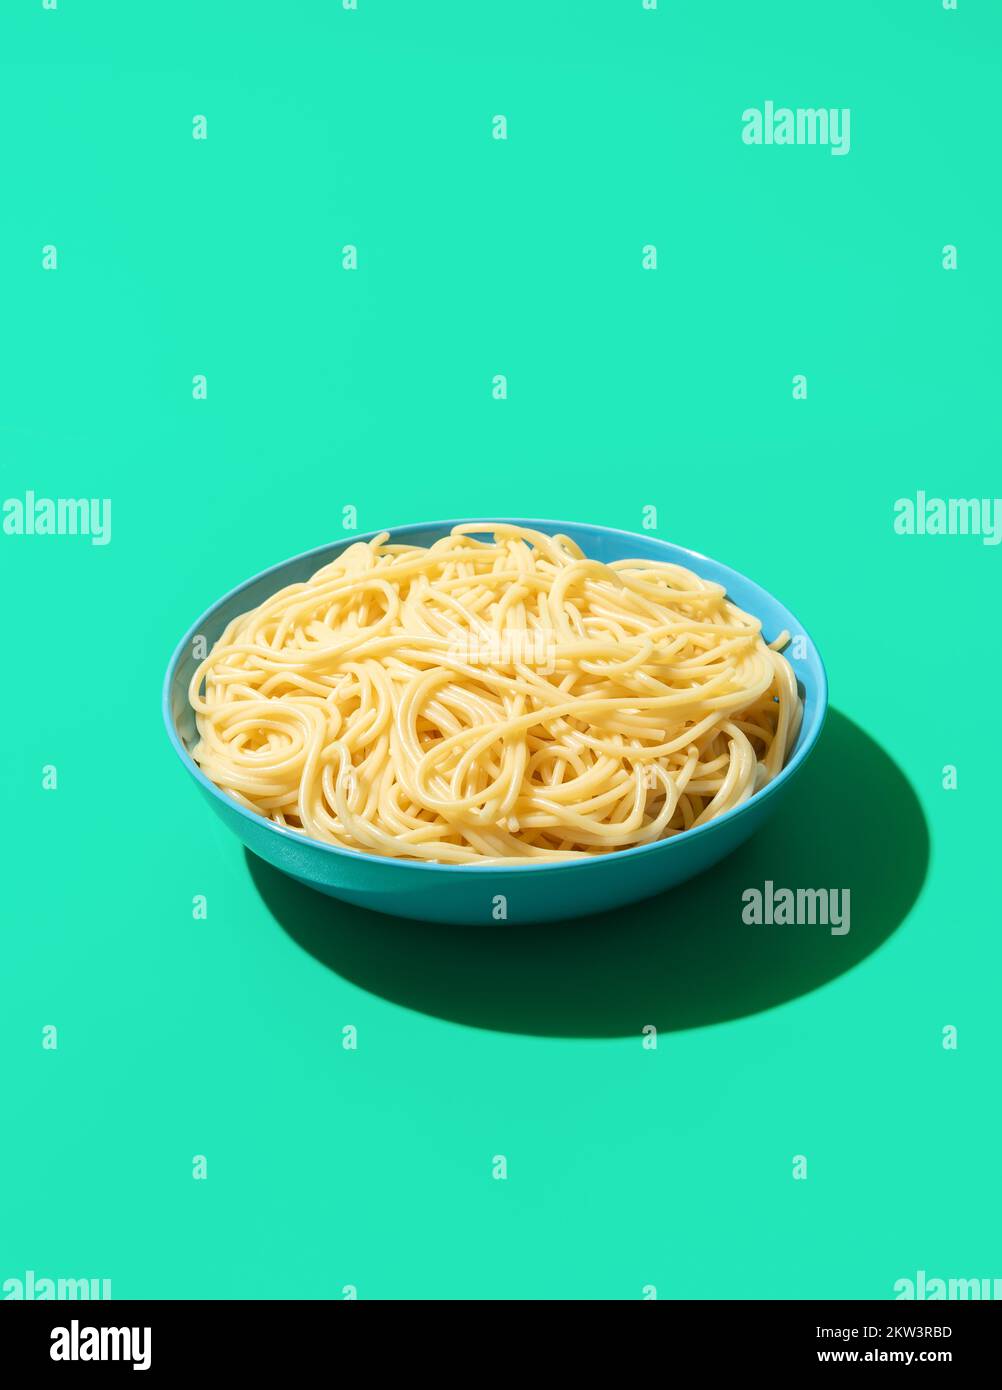 Single bowl with cooked spaghetti minimalist on a green table. Pasta without any sauce in a blue bowl in bright light on a colored background Stock Photo